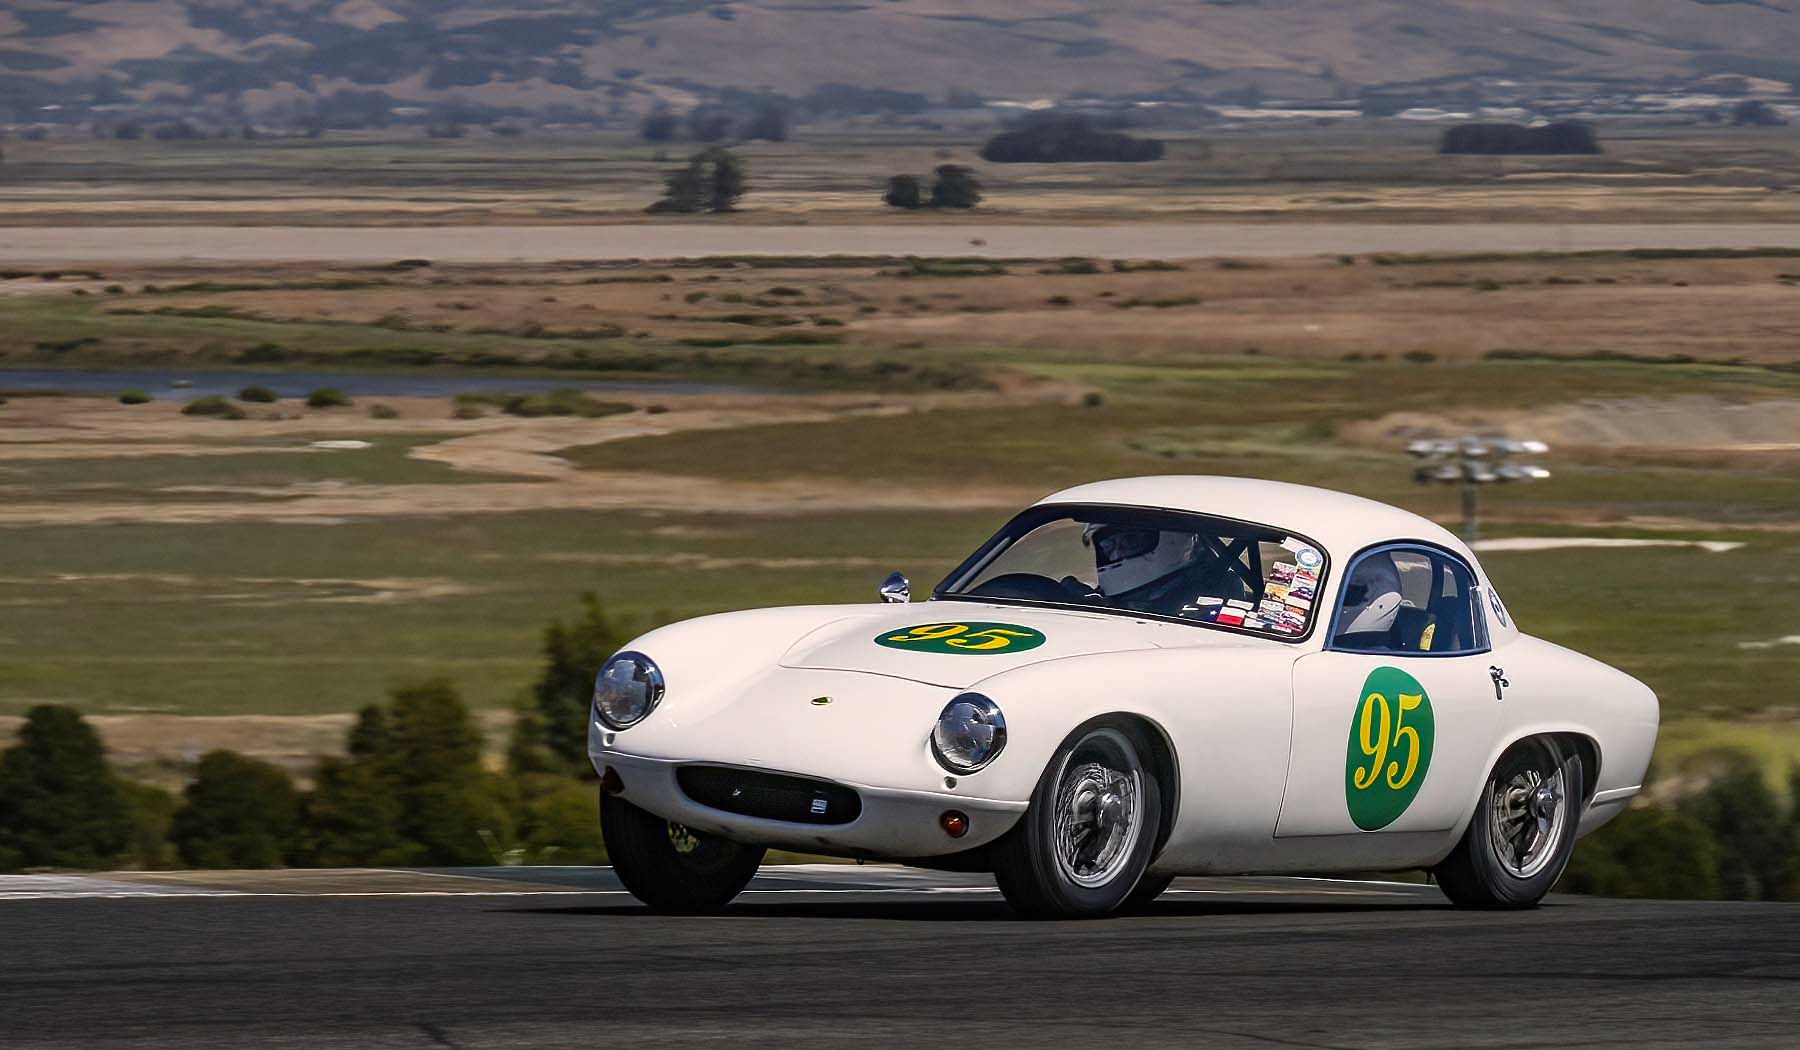 This Lotus Elite is unlisted. Shown here givine a Charity ride. Dennis Gray;Dennis Gray